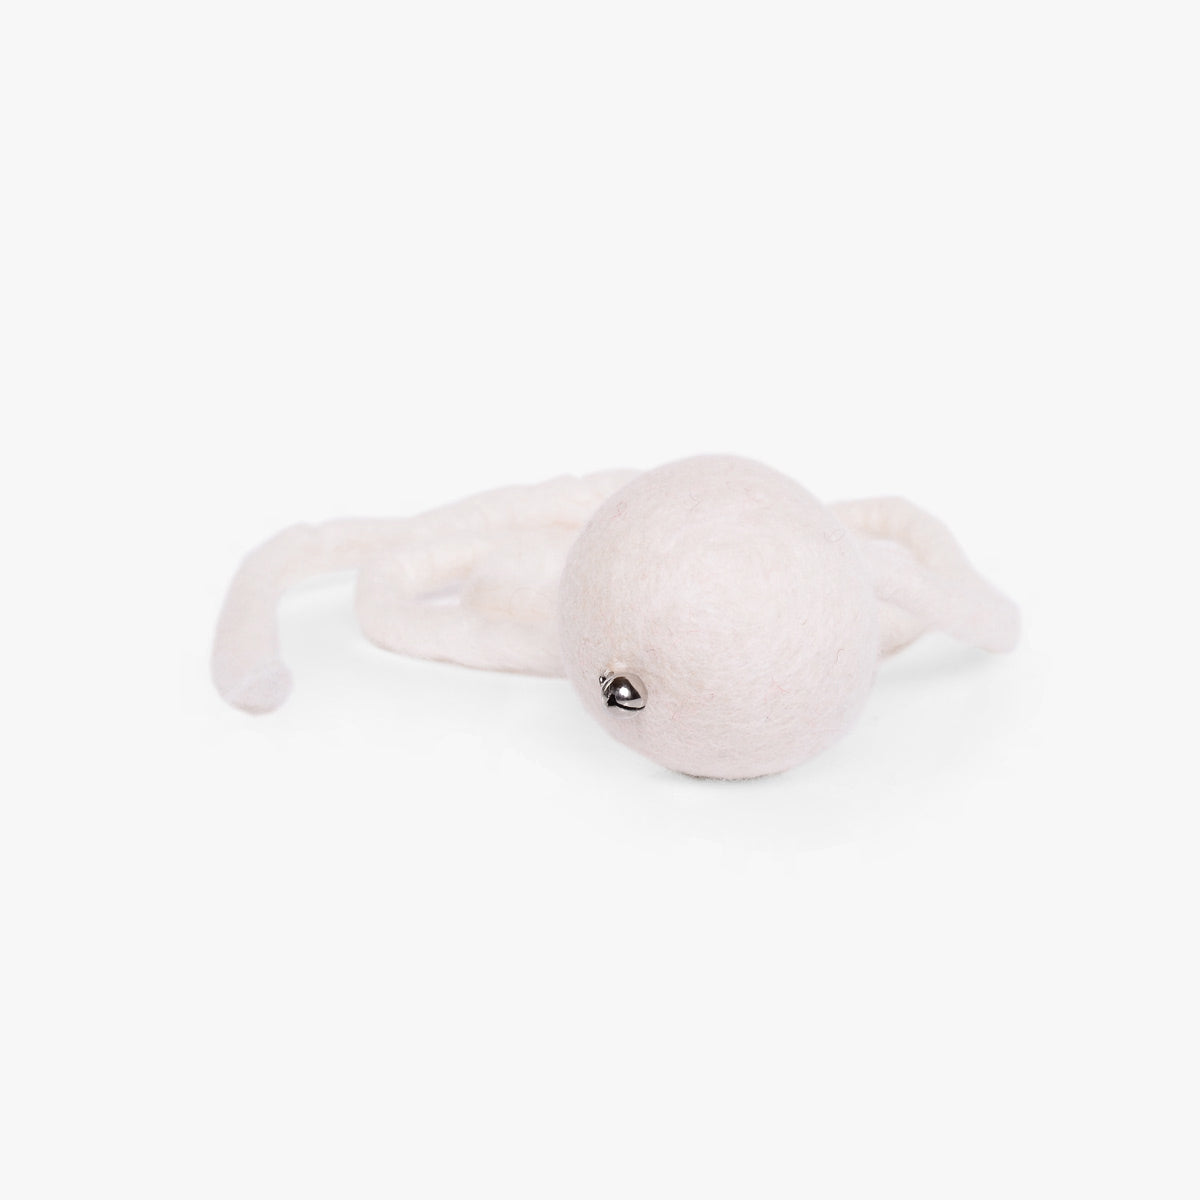 Stylecats Bell Ball Charmer Cat Toy, In White Wool Felt | at Made Moggie